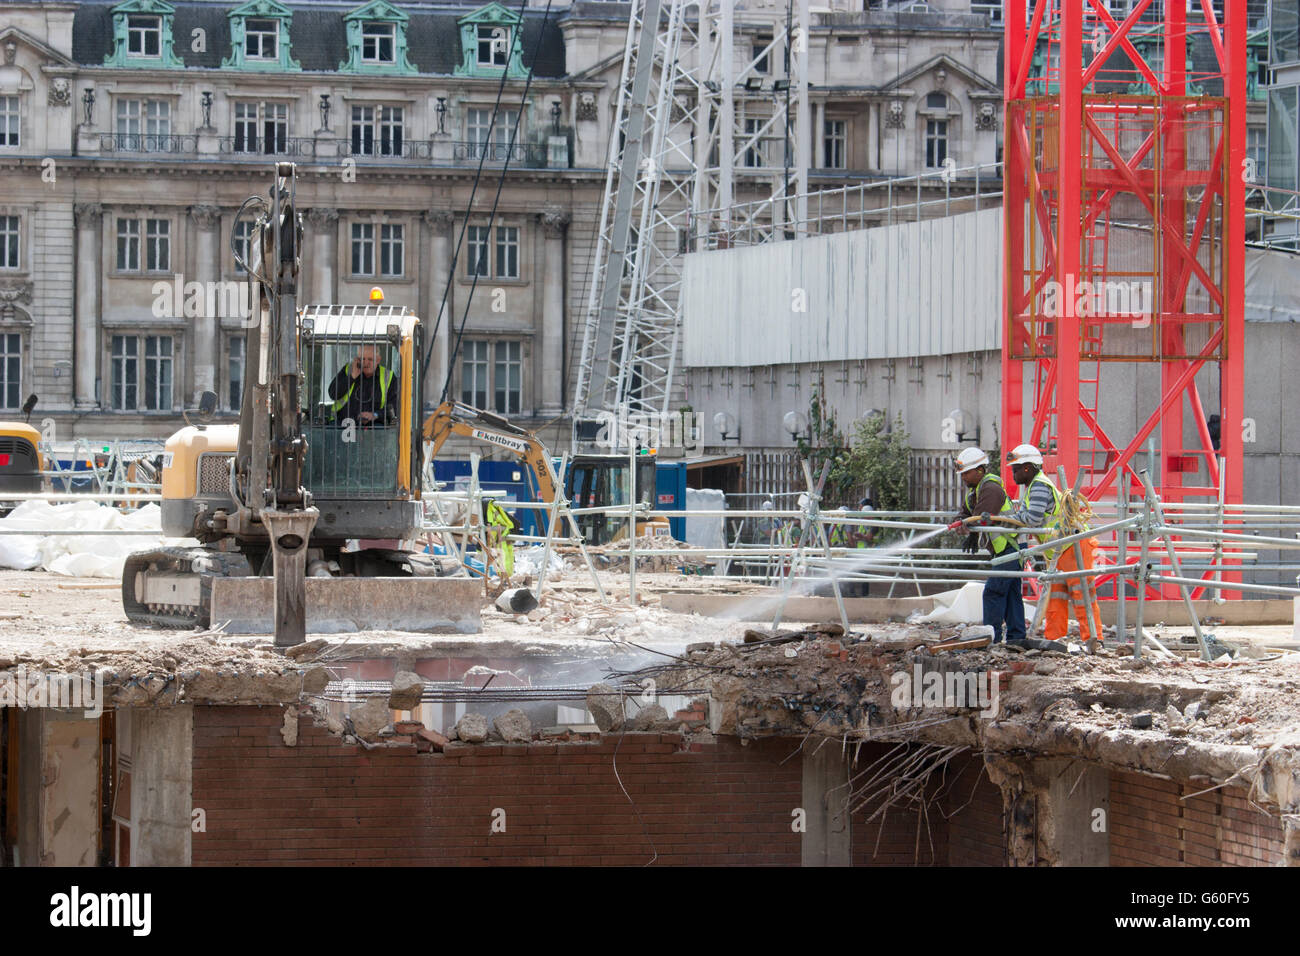 Land Securities property. Demolition on 21 Moorfield, demolition in the City, Stock Photo